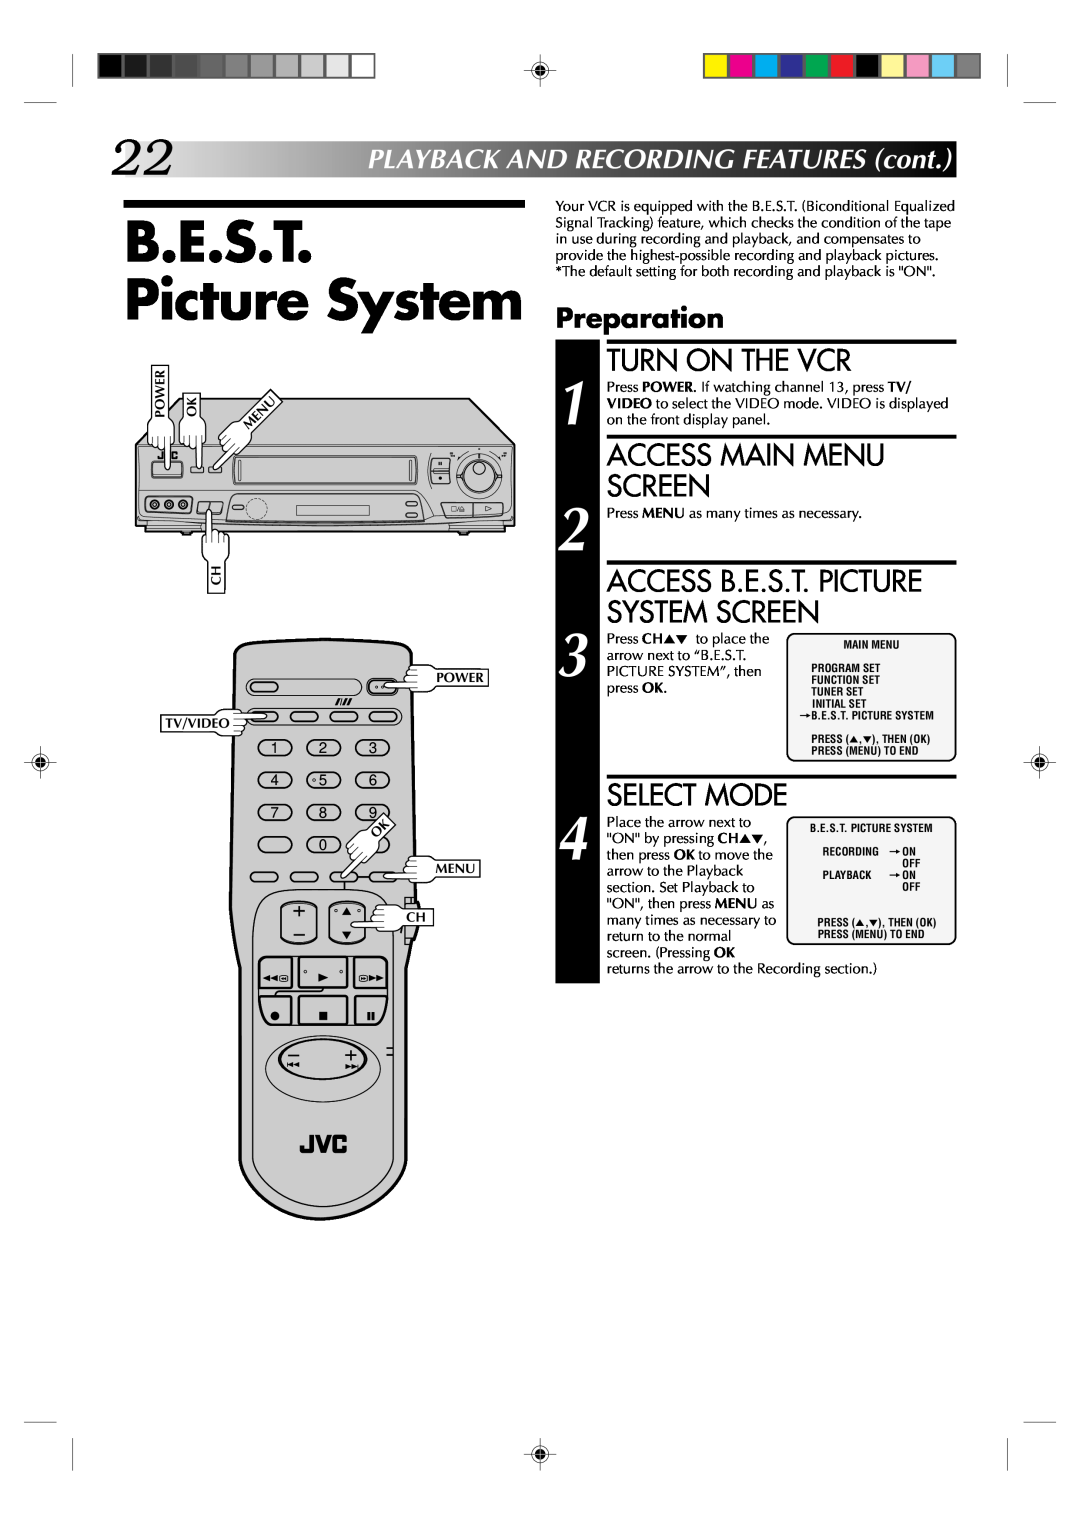 JVC HR-J631T manual Picture System Preparation, Select Mode, 22PLAYBACKANDRECORDINGFEATUREScont, Turn On The Vcr 